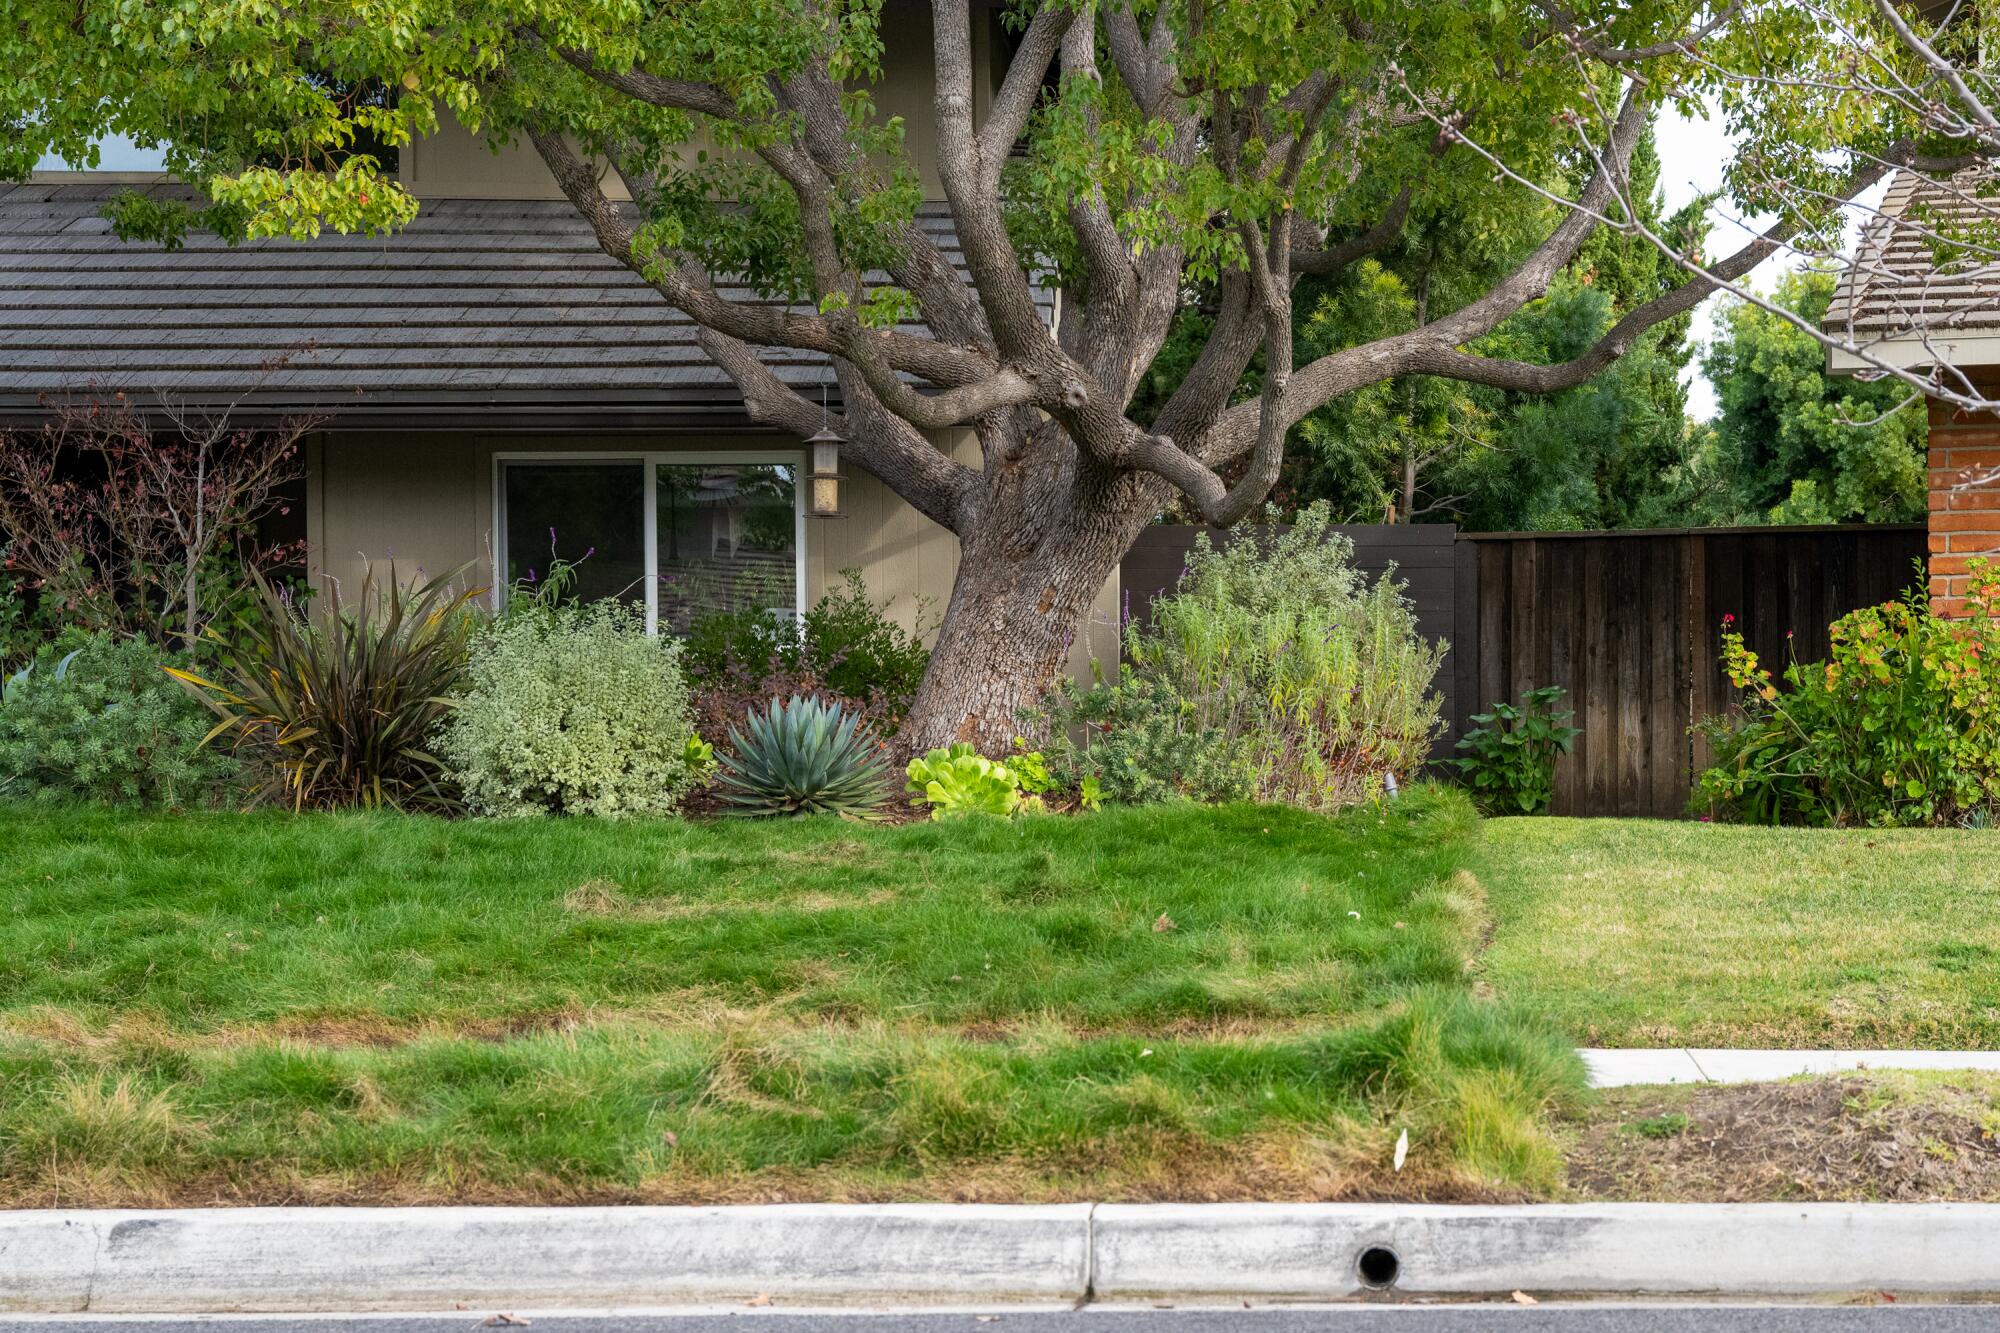 Side-by-side front yards, with native grass in one yard and common lawn grass in another.